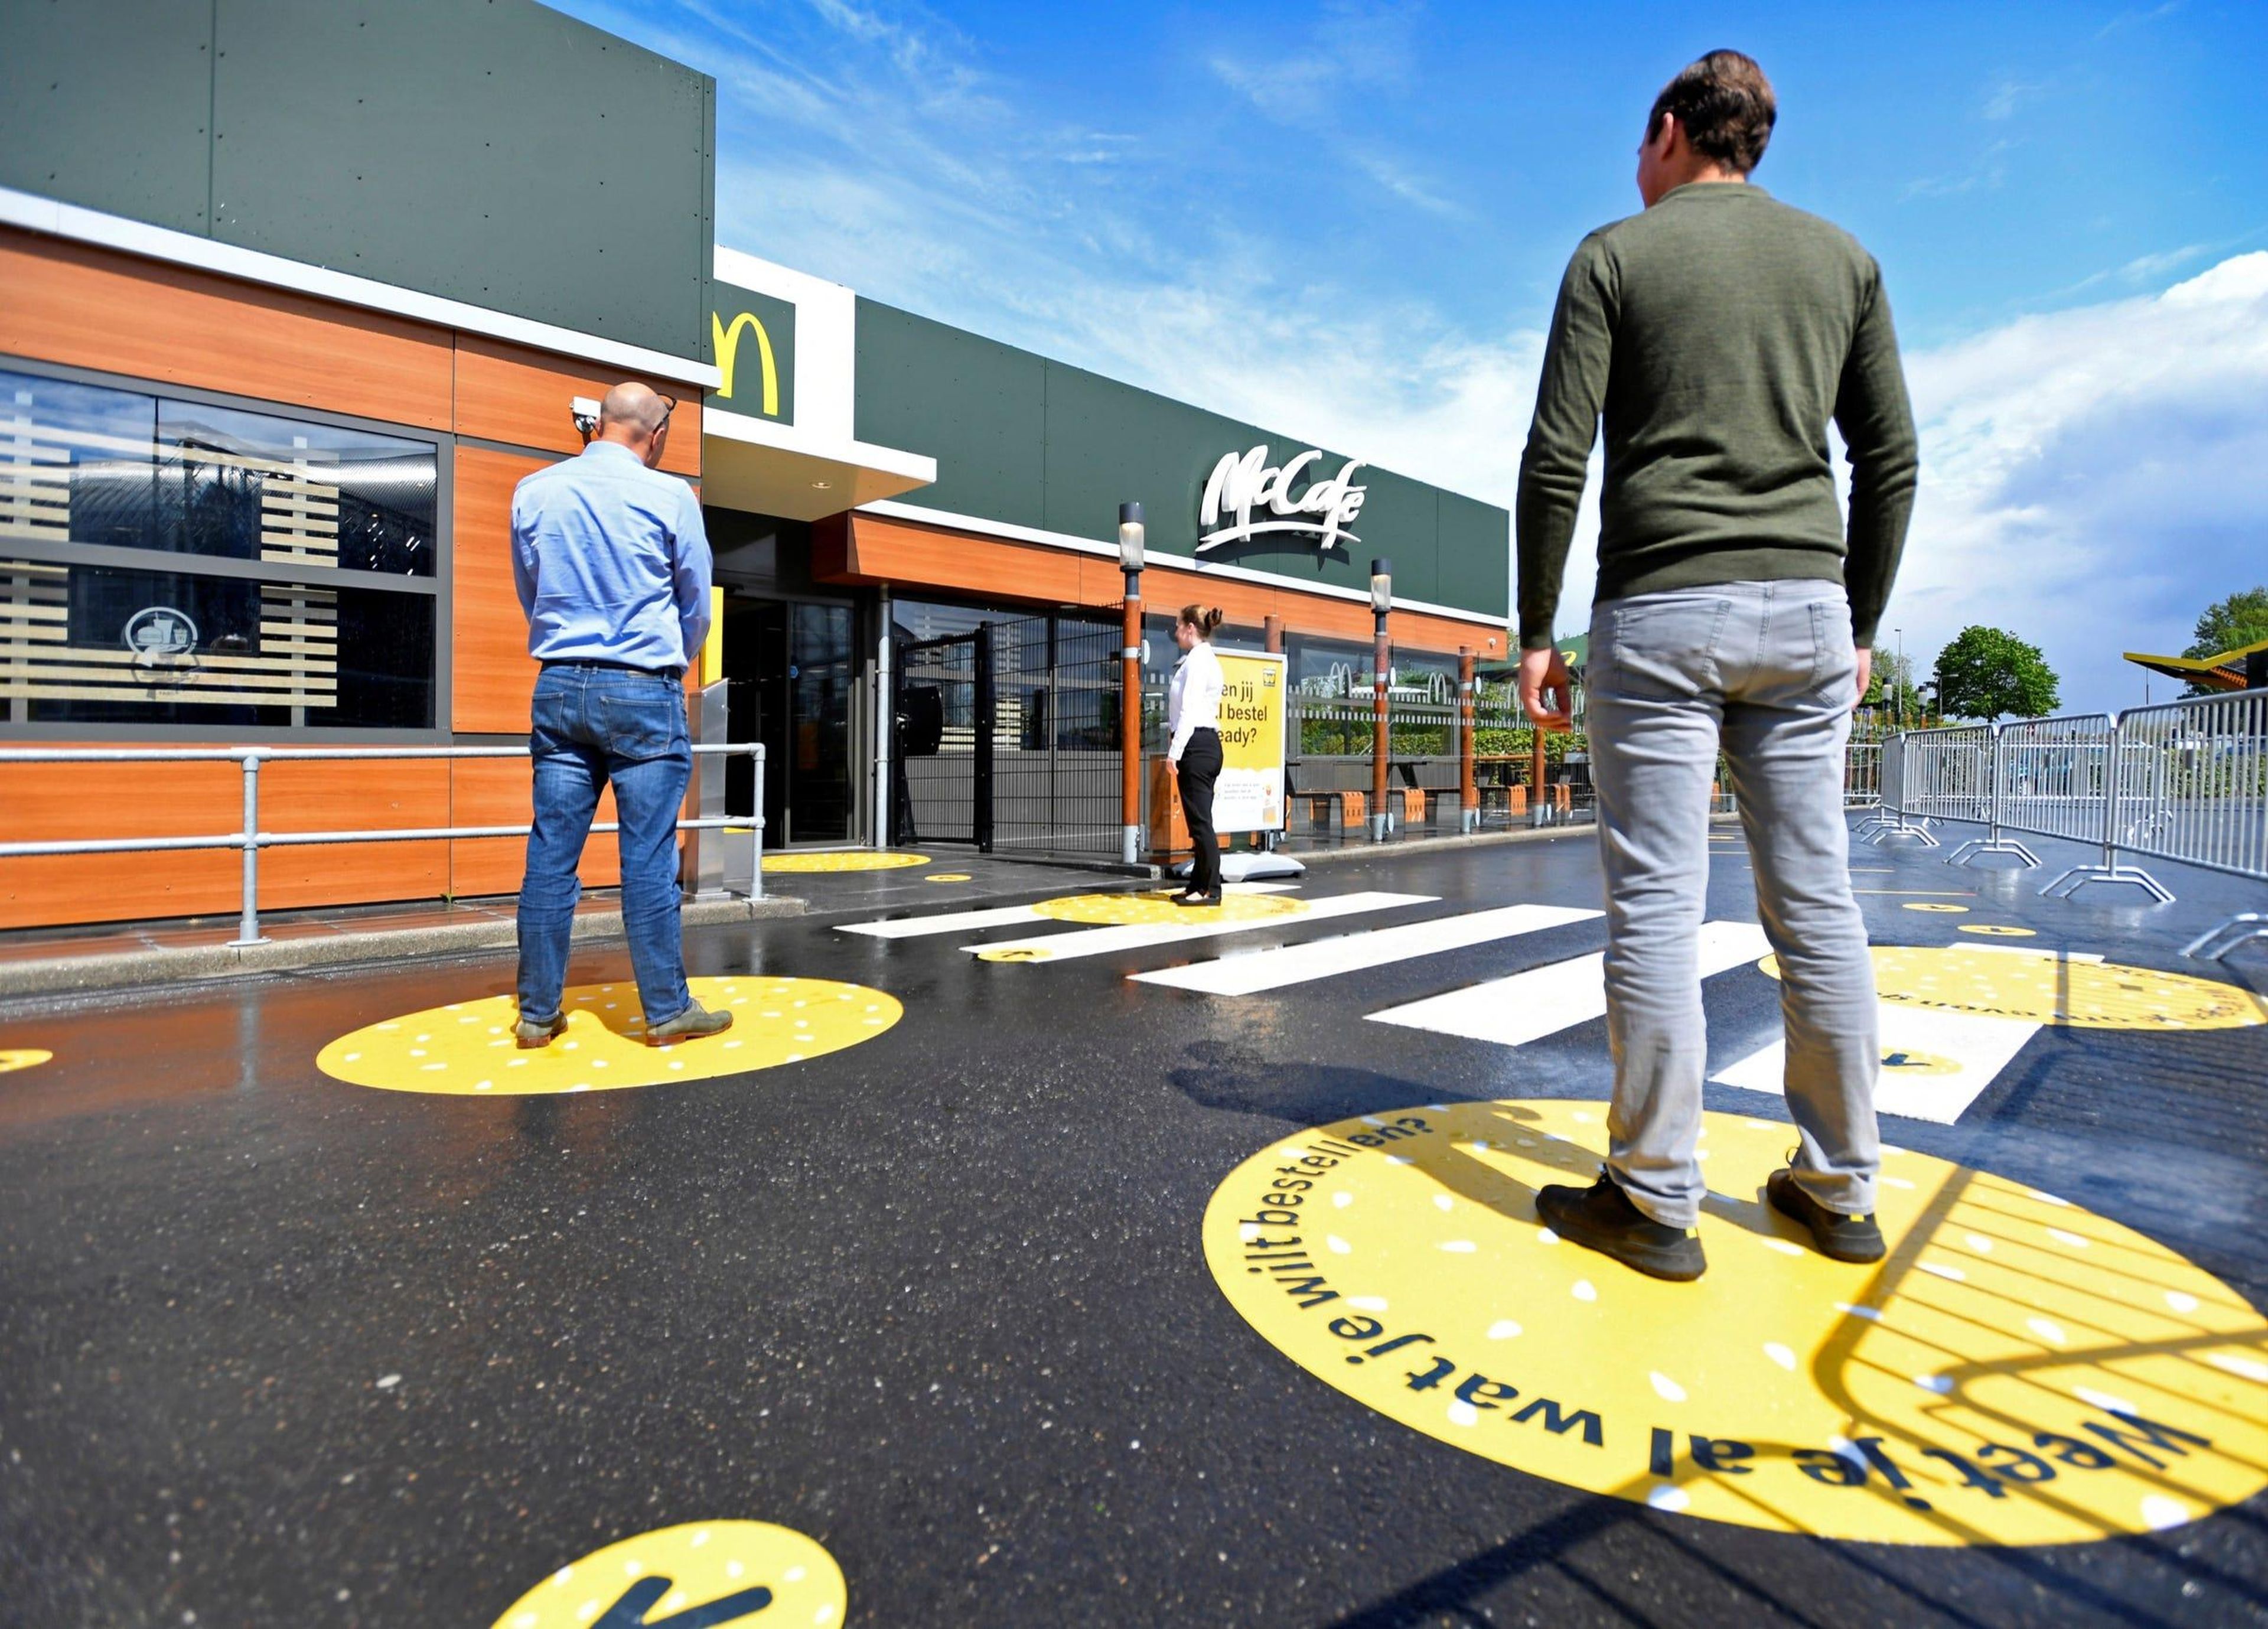 McDonald's is testing decals to promote social distancing among customers.